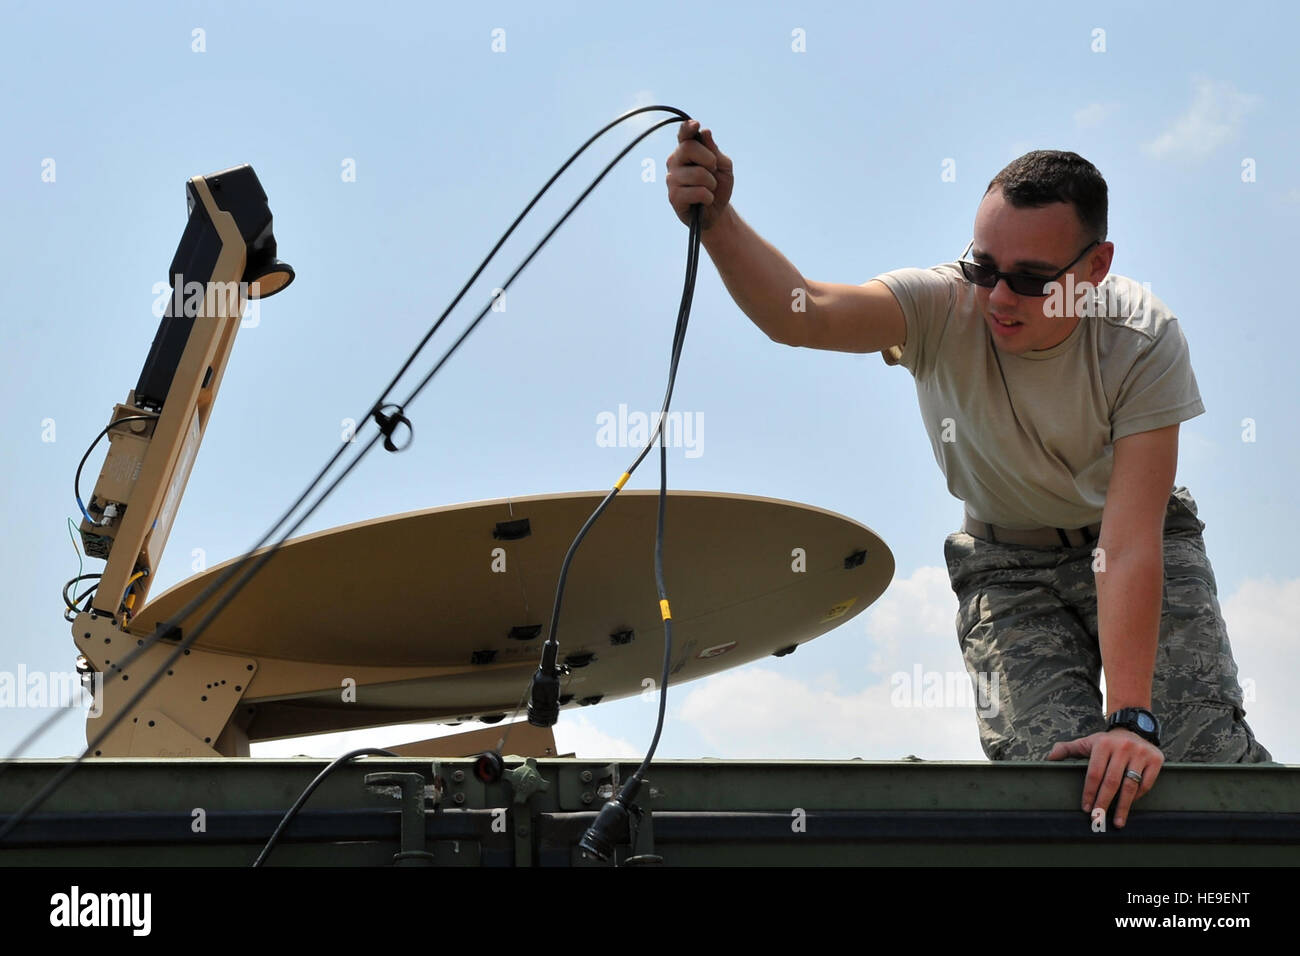 U.S. Air Force Staff Sgt. Matthew Vile, 36th Mobility Response Squadron cyber transport systems technician, sets up a satellite communications antenna at the Tribhuvan International Airport in Kathmandu, Nepal, May 6. The setup improved airfield radio range communications capabilities for the 36th CRG Airmen who are deployed to Nepal from Andersen Air Force Base, Guam, as part of Joint Task Force 505 participating in Operation Sahayogi Haat. The JTF is in Nepal to help the government and U.S. Agency for International Development with airfield operations and processing relief supplies after an  Stock Photo